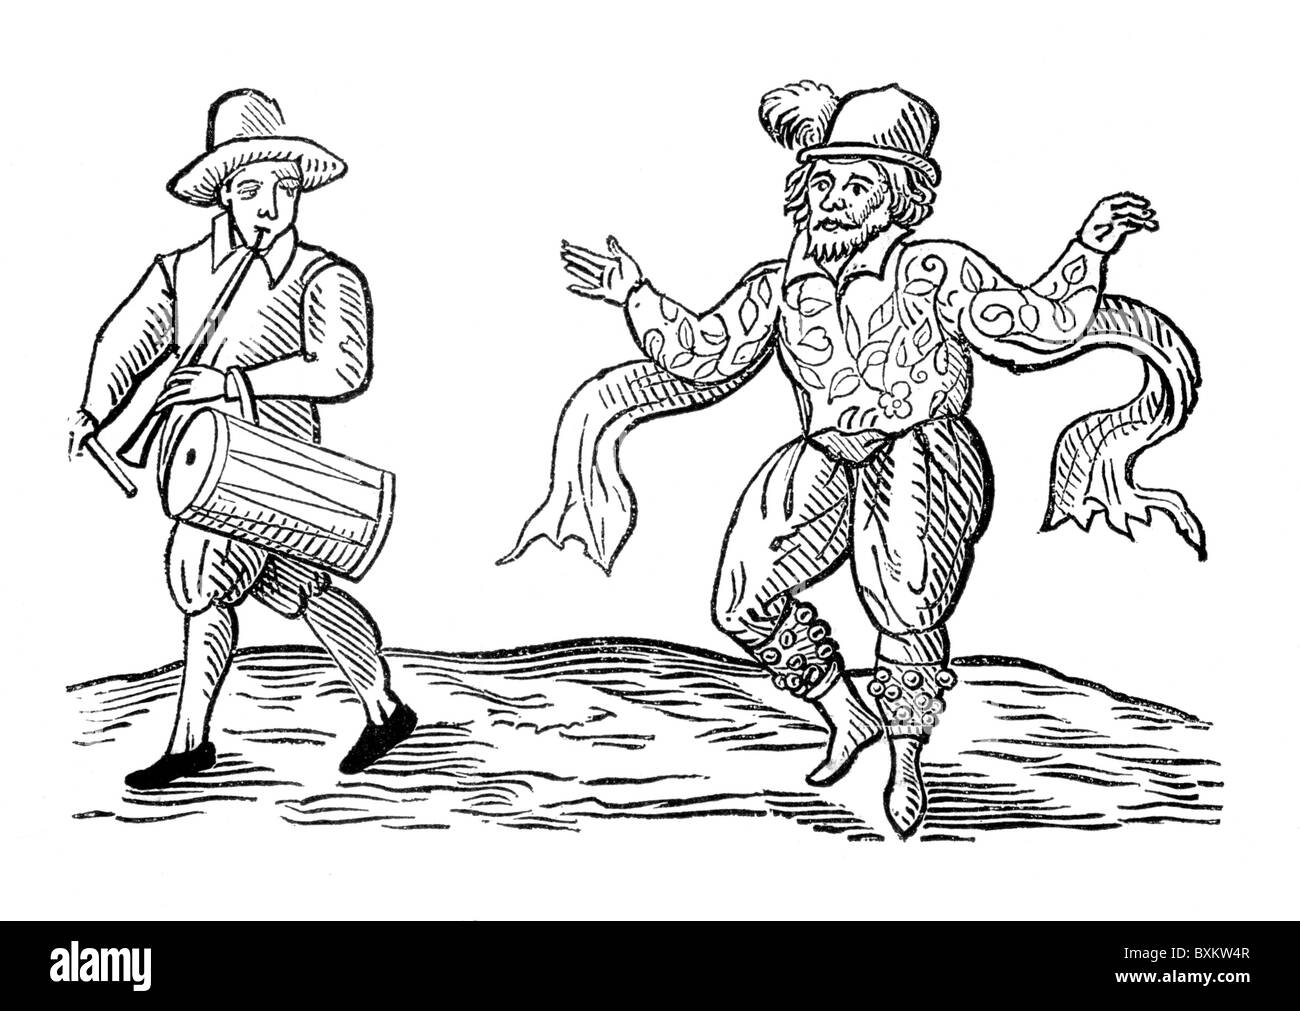 William Kemp Dancing the Morris from Kemp's 'Nine Daies Wonder', 1600; Black and White Illustration; Stock Photo